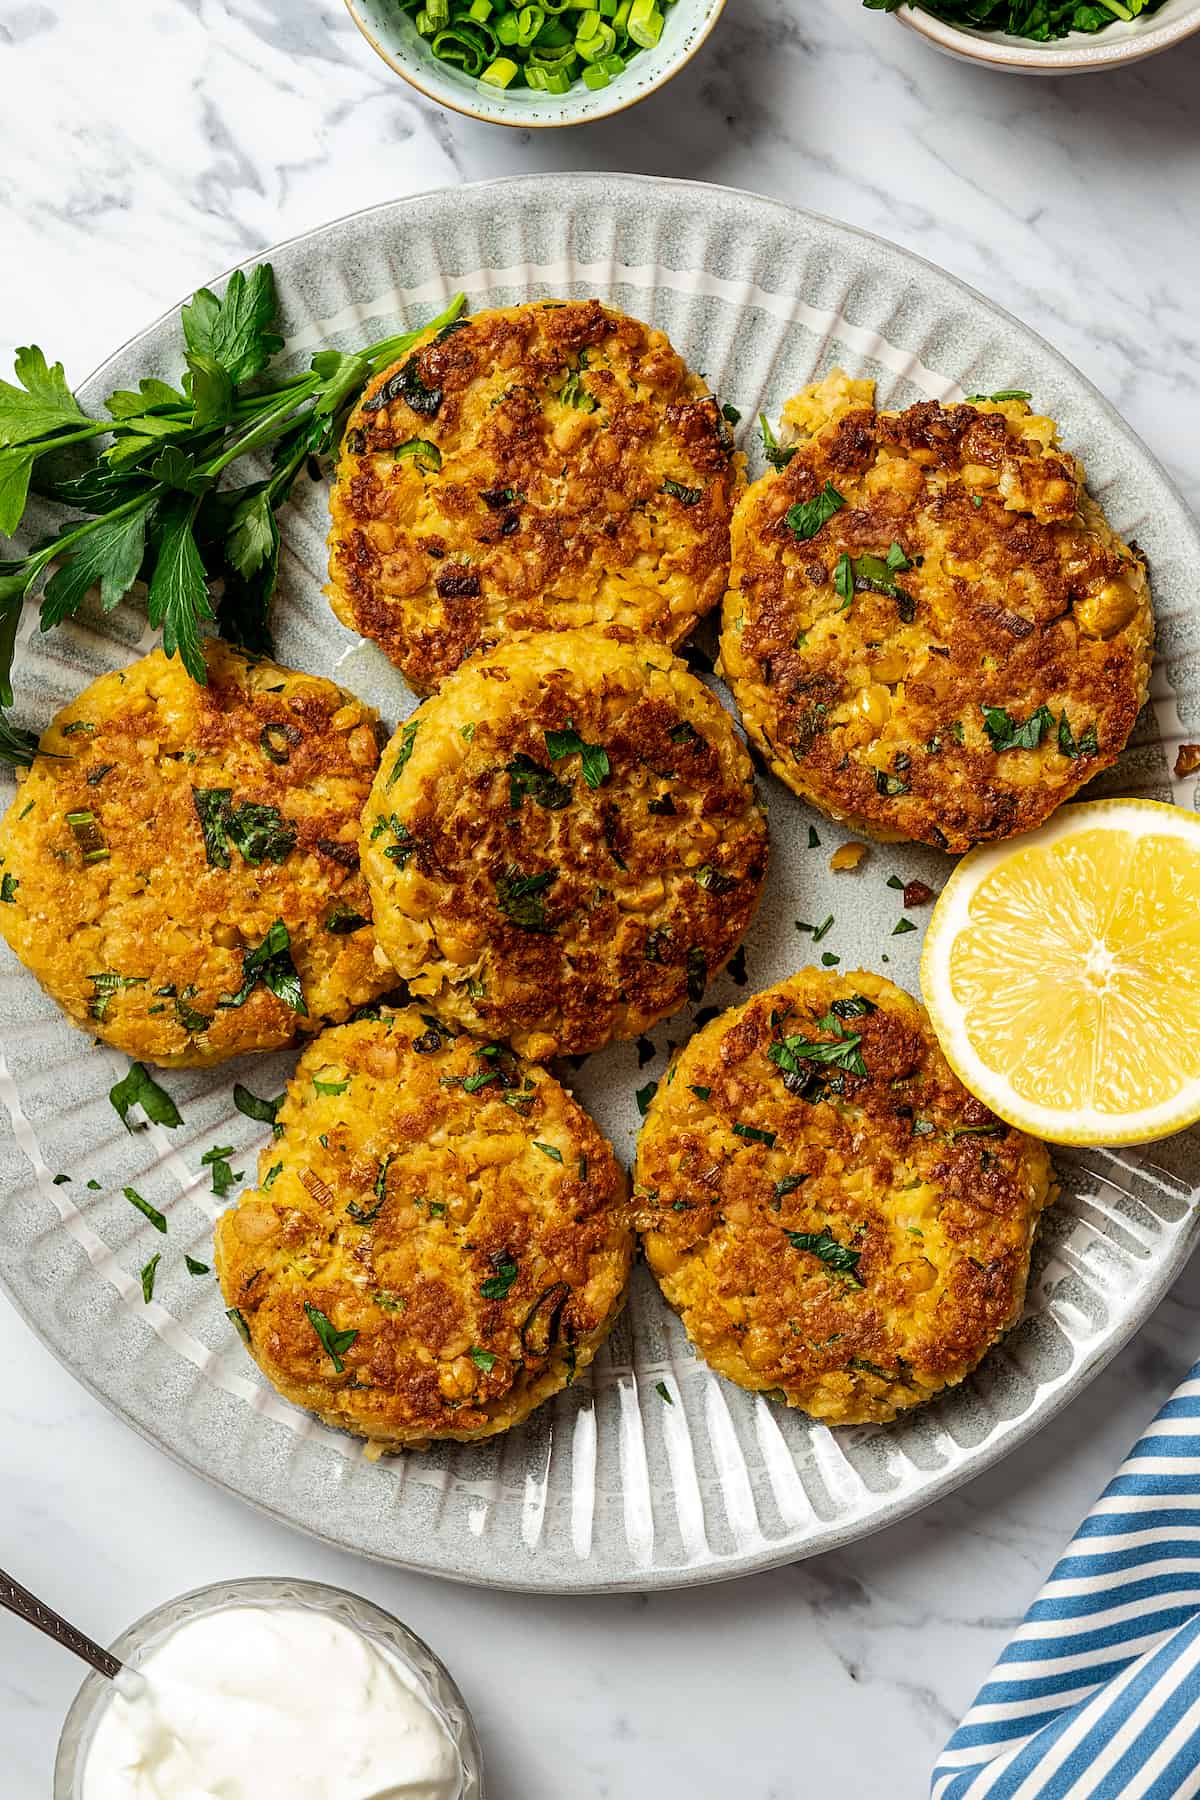 Vegetarian patties made of chickpeas, lightly fried and arranged on a serving plate.